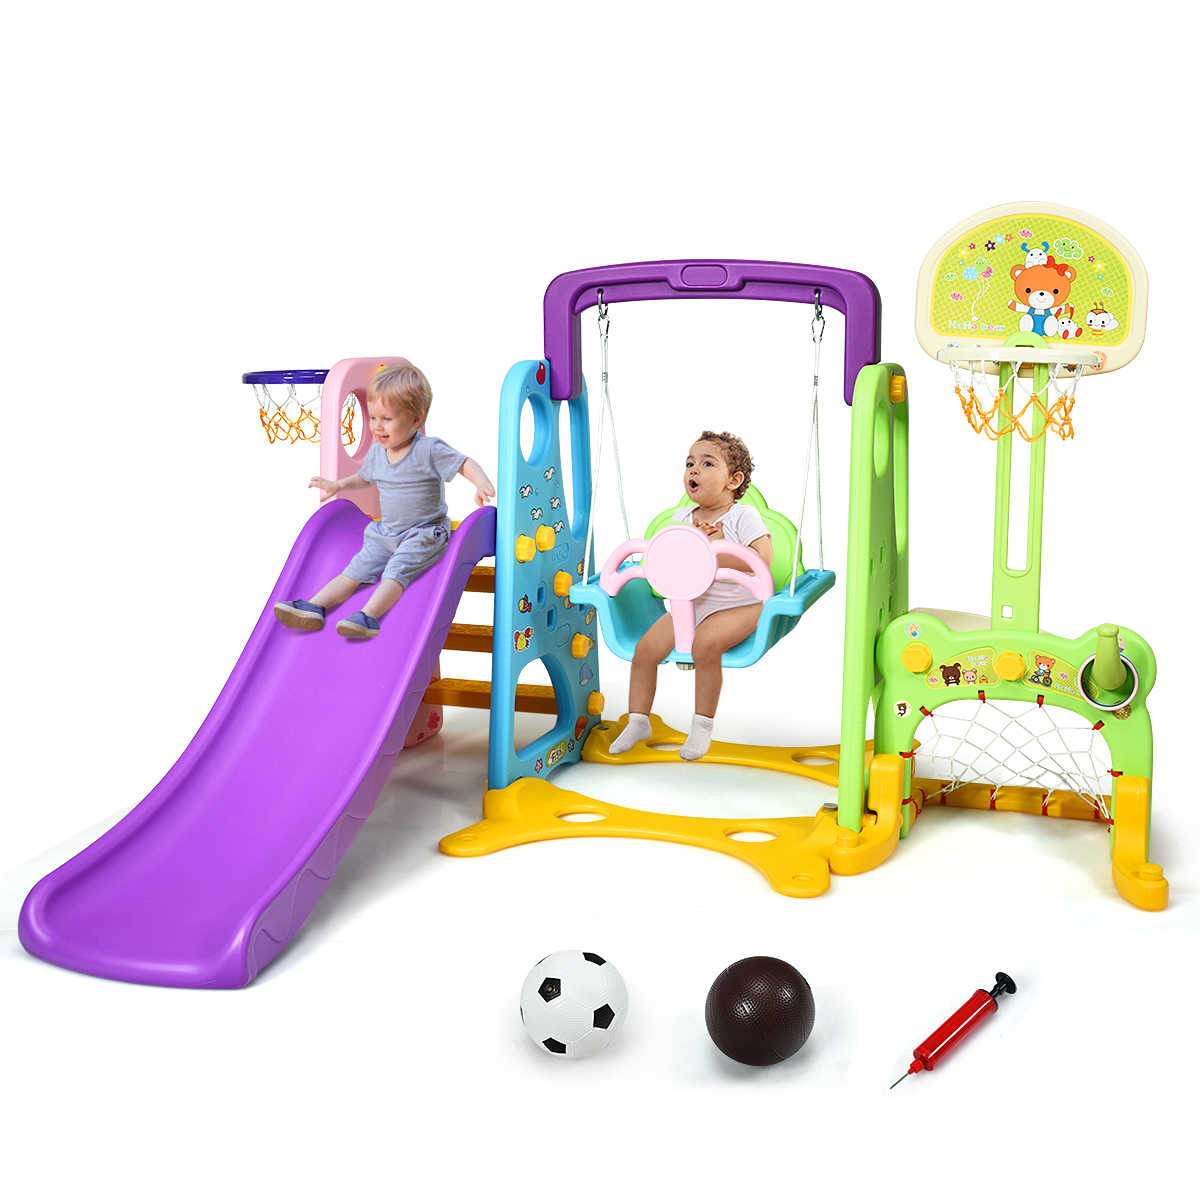 Costway 6 In 1 Toddler Climber and Swing Set w/ Basketball Hoop & Football Gate Backyard - image 1 of 10